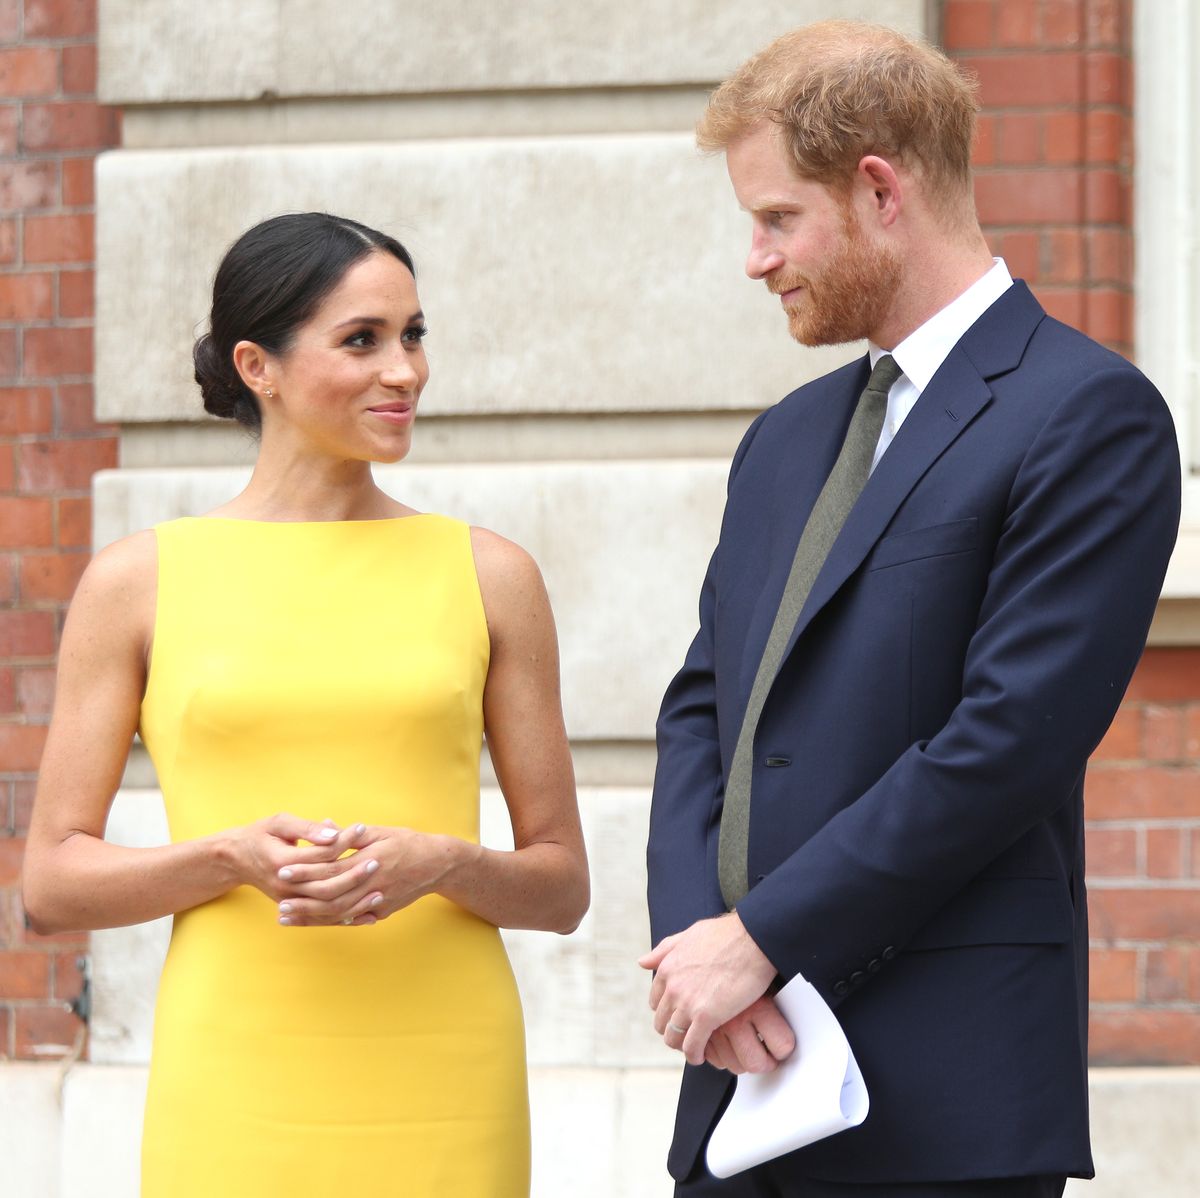 london, england   july 05  prince harry, duke of sussex and meghan, duchess of sussex arrive to meet youngsters from across the commonwealth as they attend the your commonwealth youth challenge reception at marlborough house on july 05, 2018 in london, england photo by yui mok   wpa poolgetty images